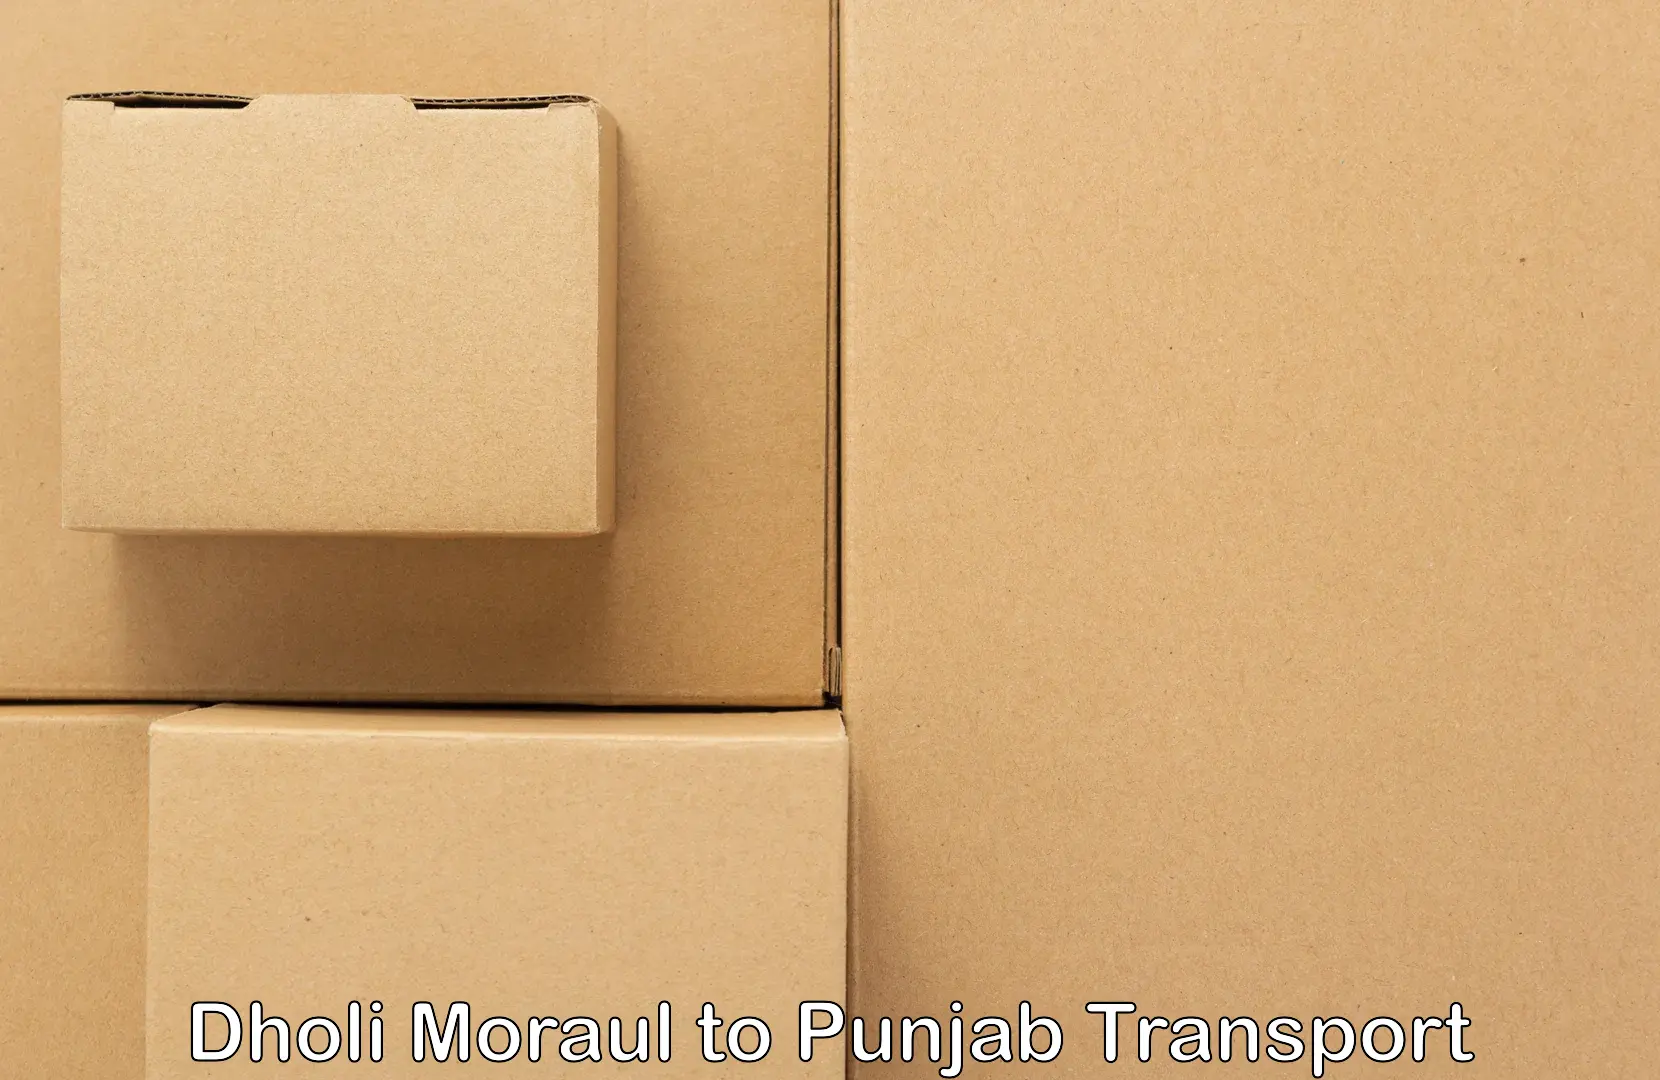 Truck transport companies in India Dholi Moraul to Jagraon